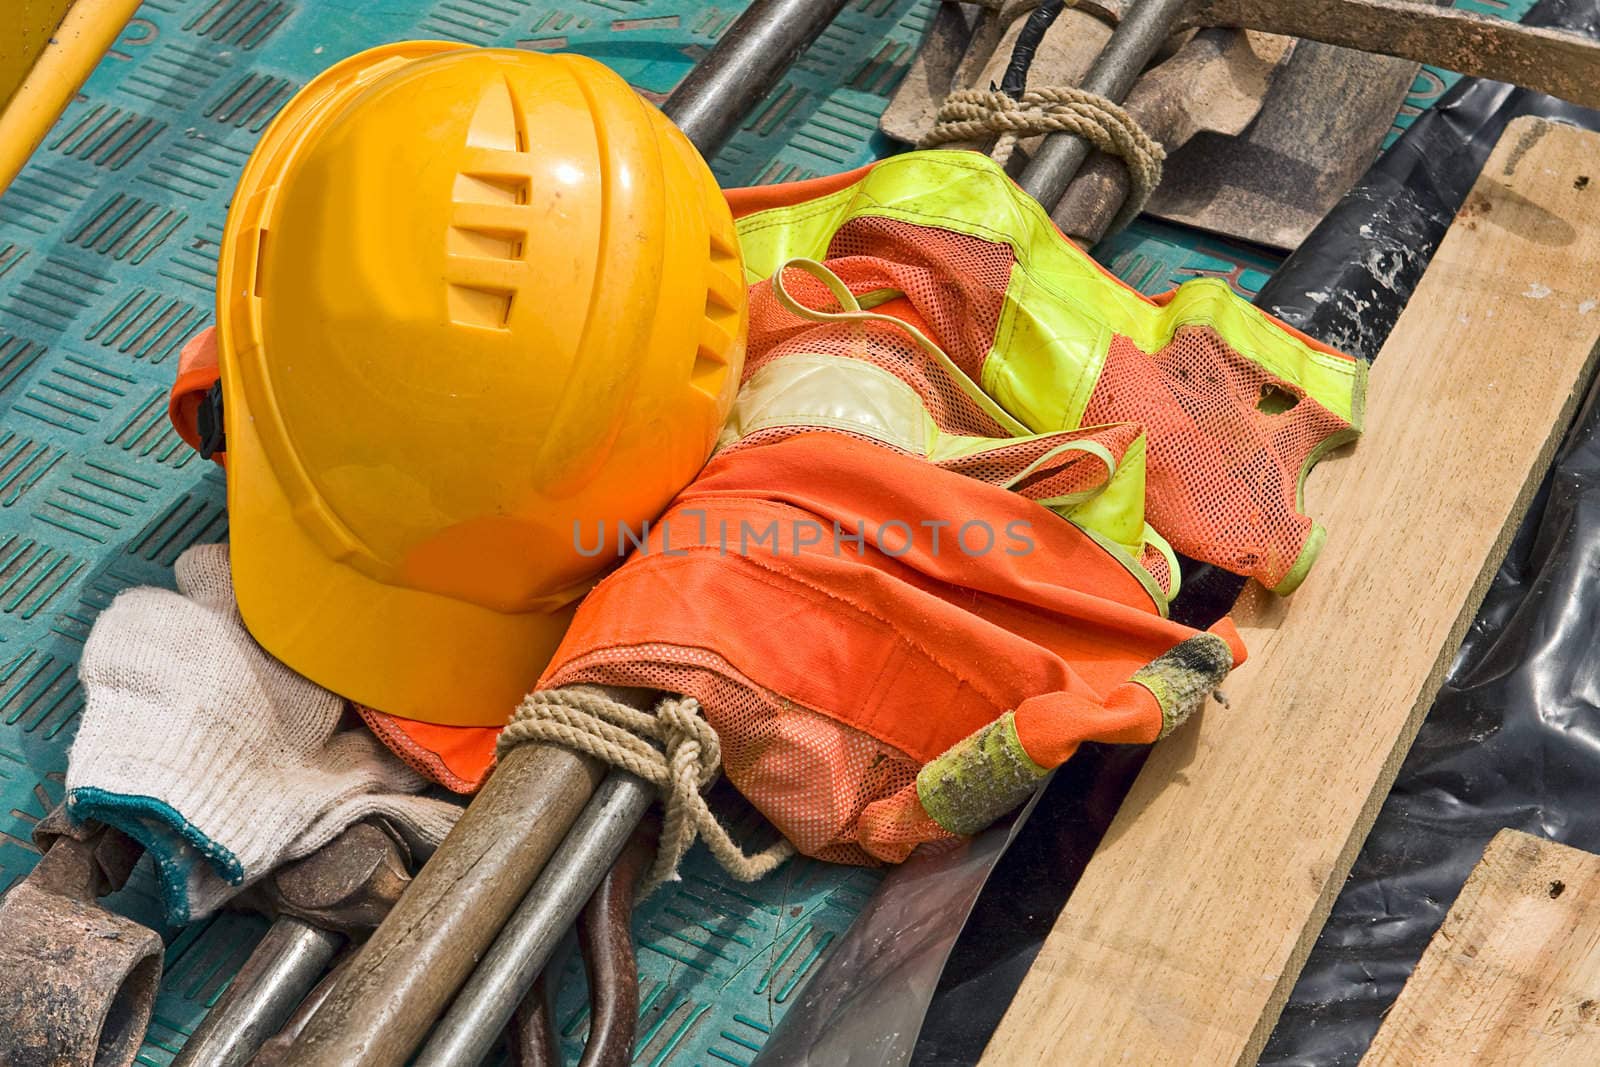 Construction worker supplies close up by cozyta